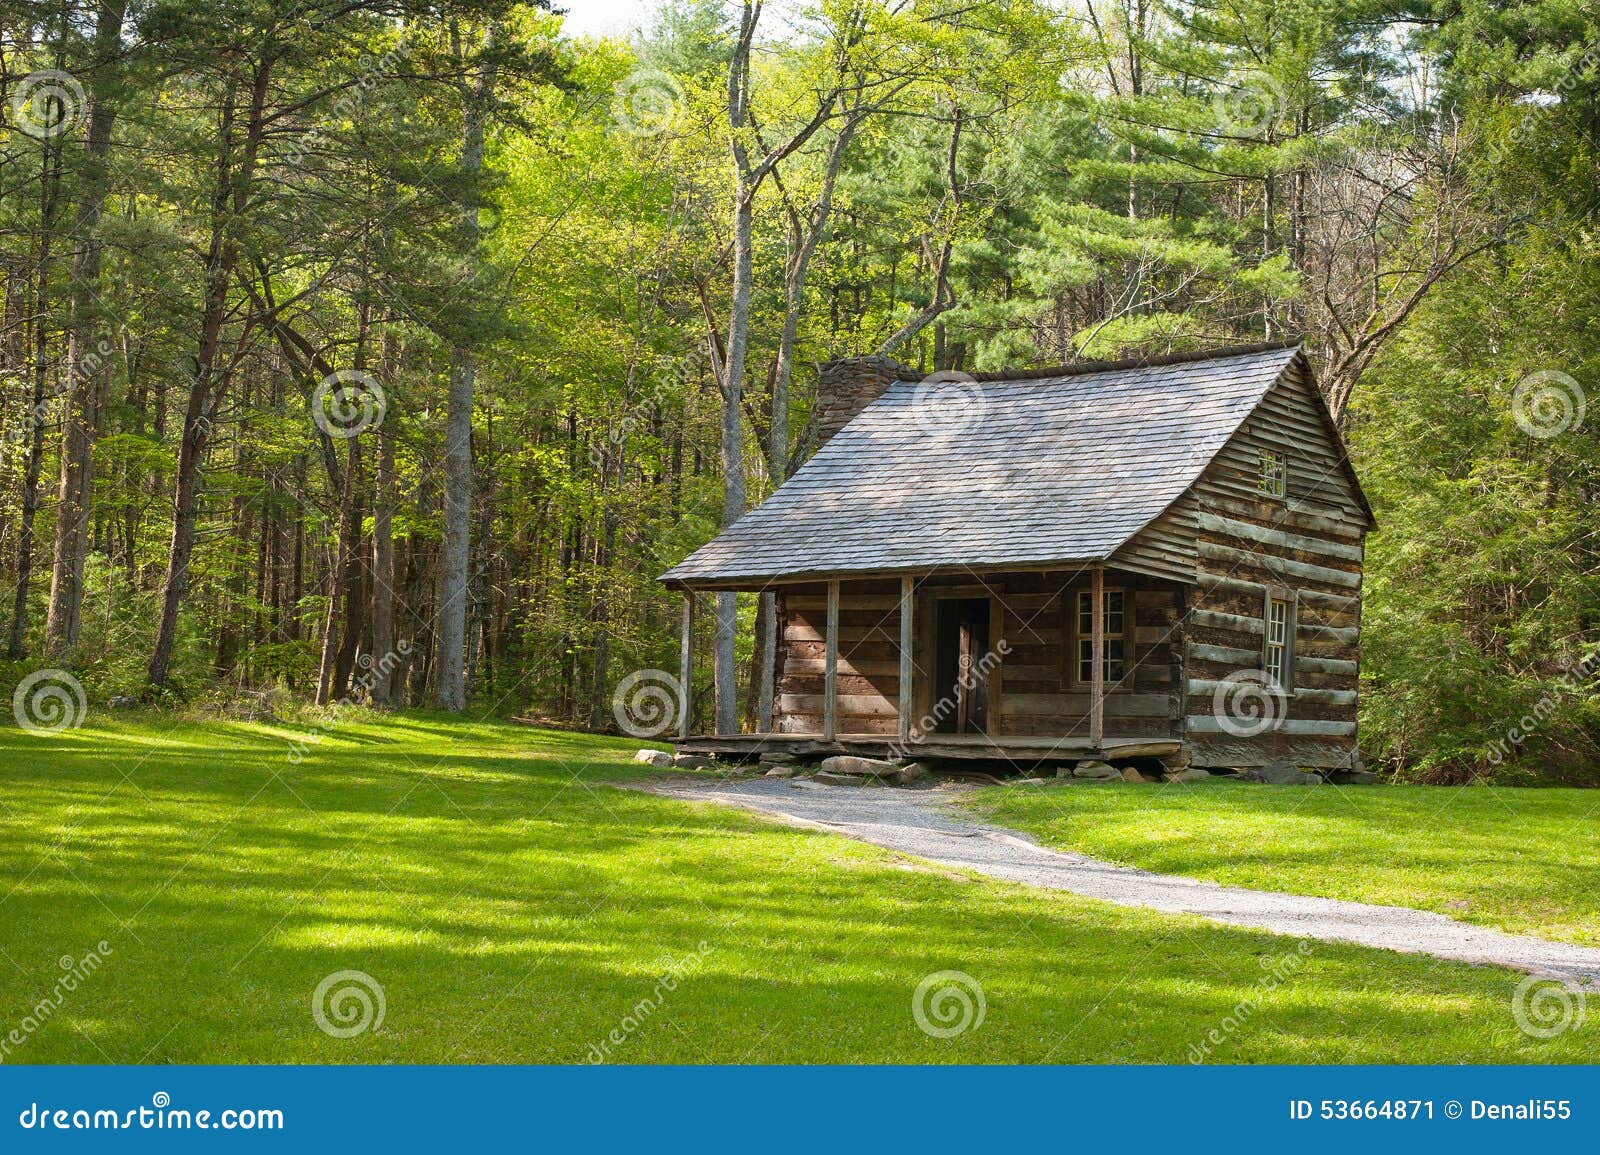 rustic cabin in forest.